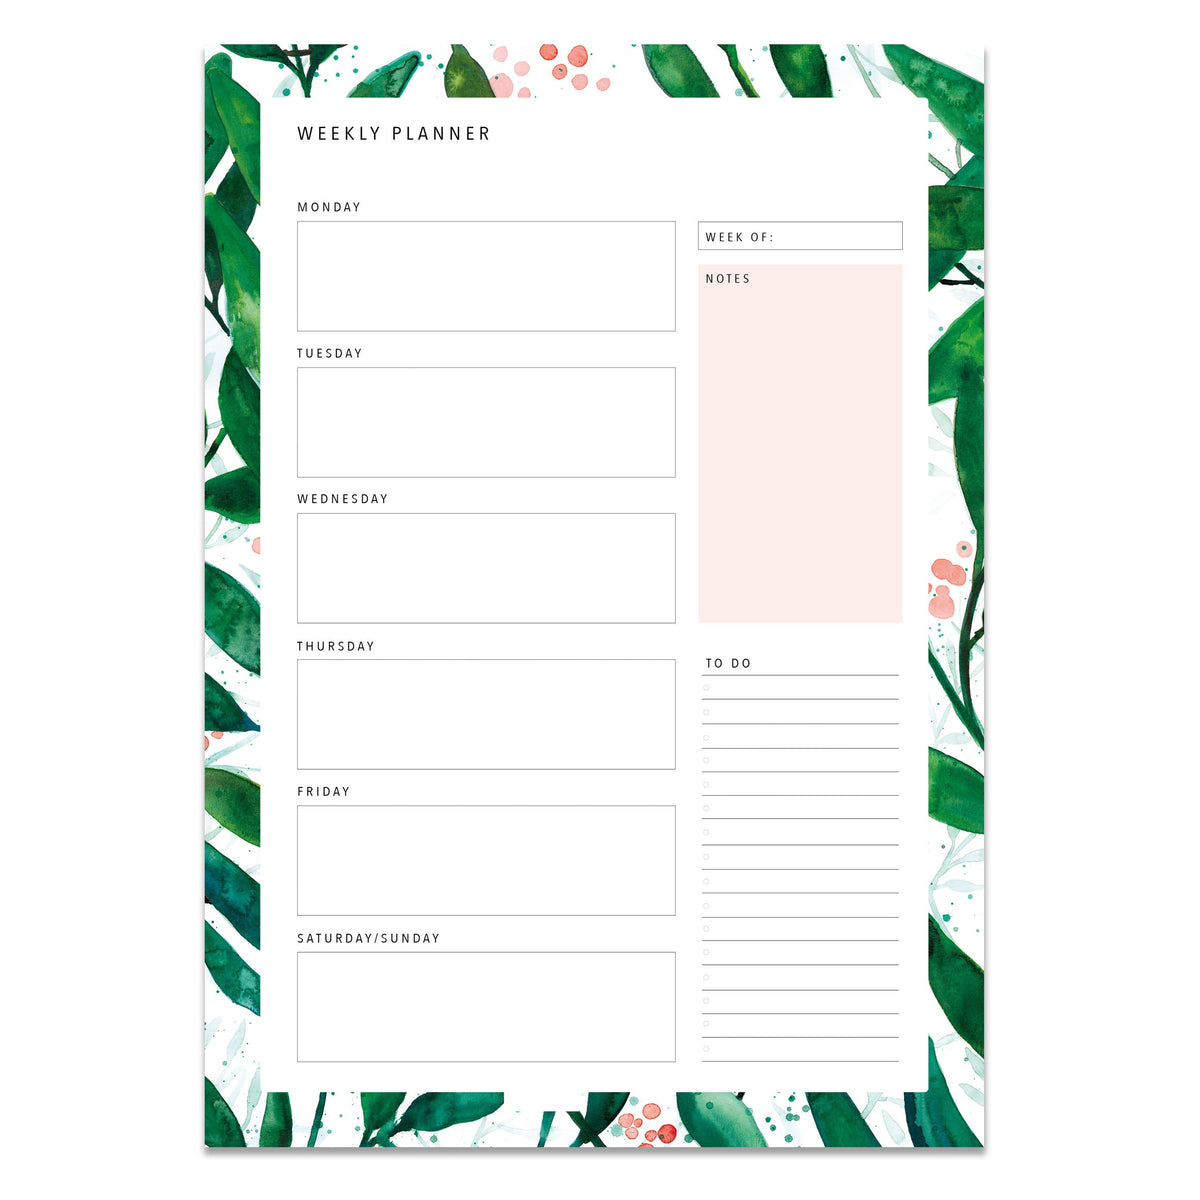 Weekly Planner - Green Leaves No 1 - A4 Wochenplaner Leo la Douce 